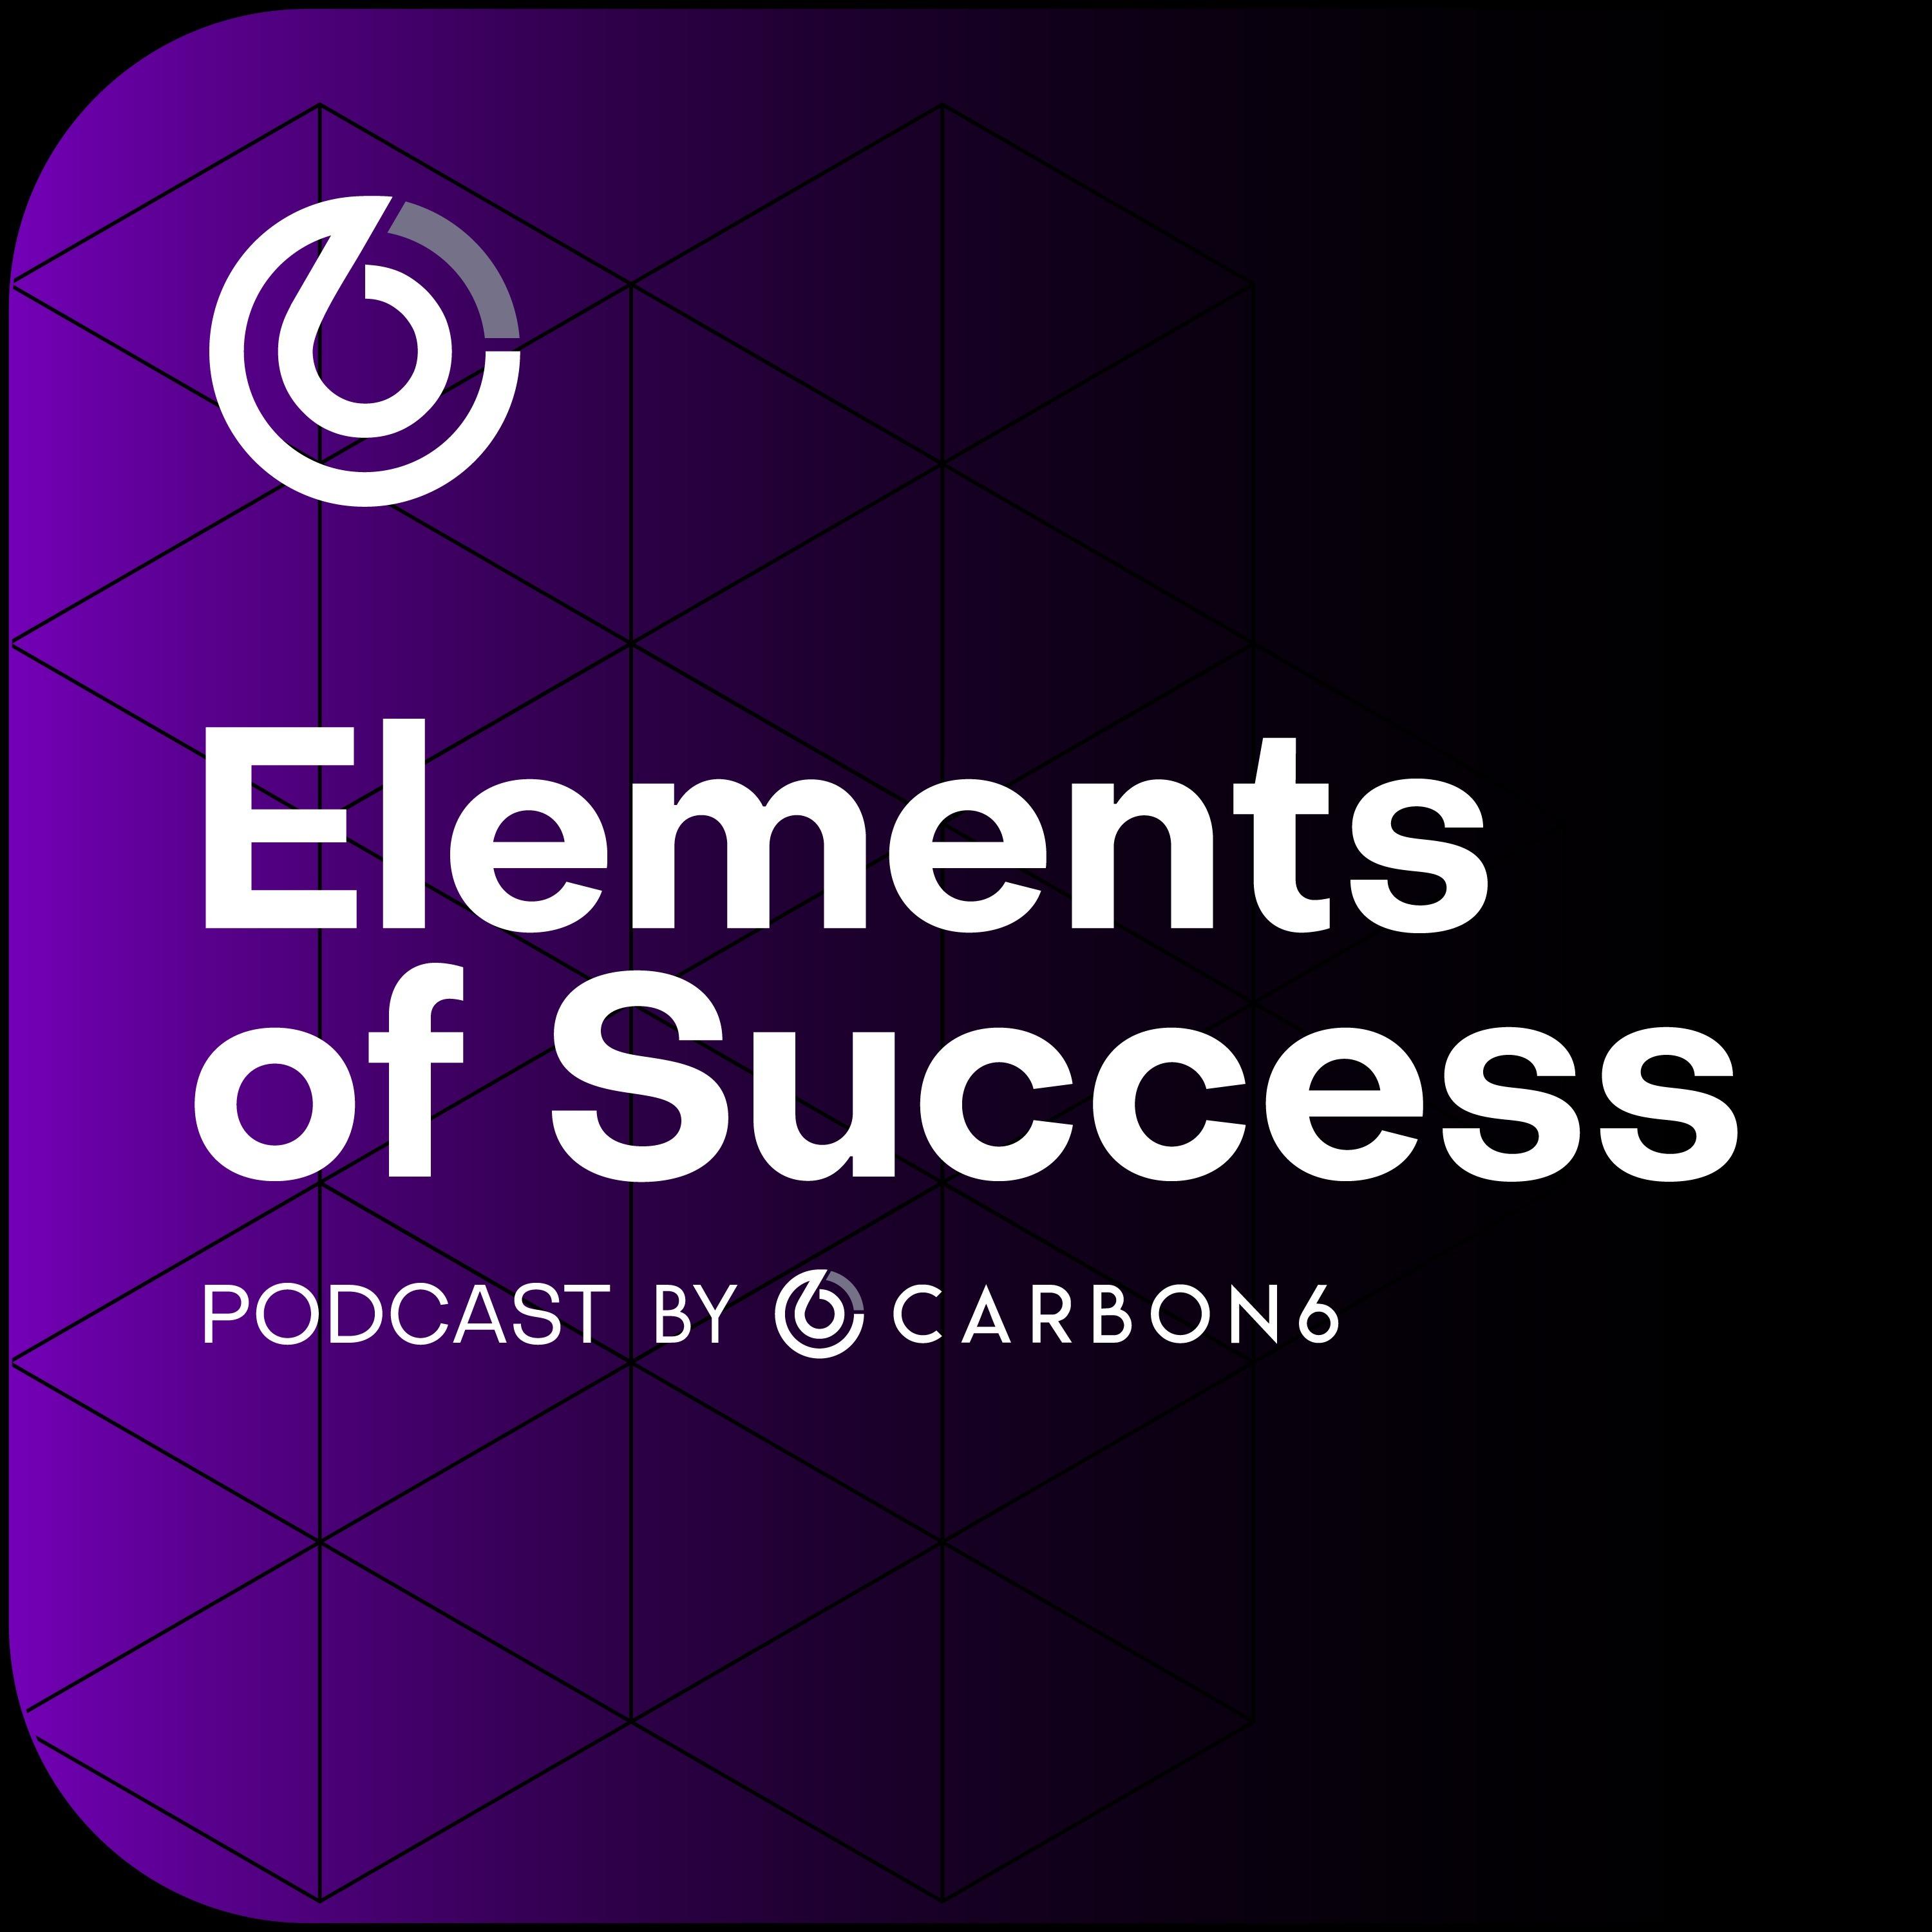 Elements of Success by Carbon6